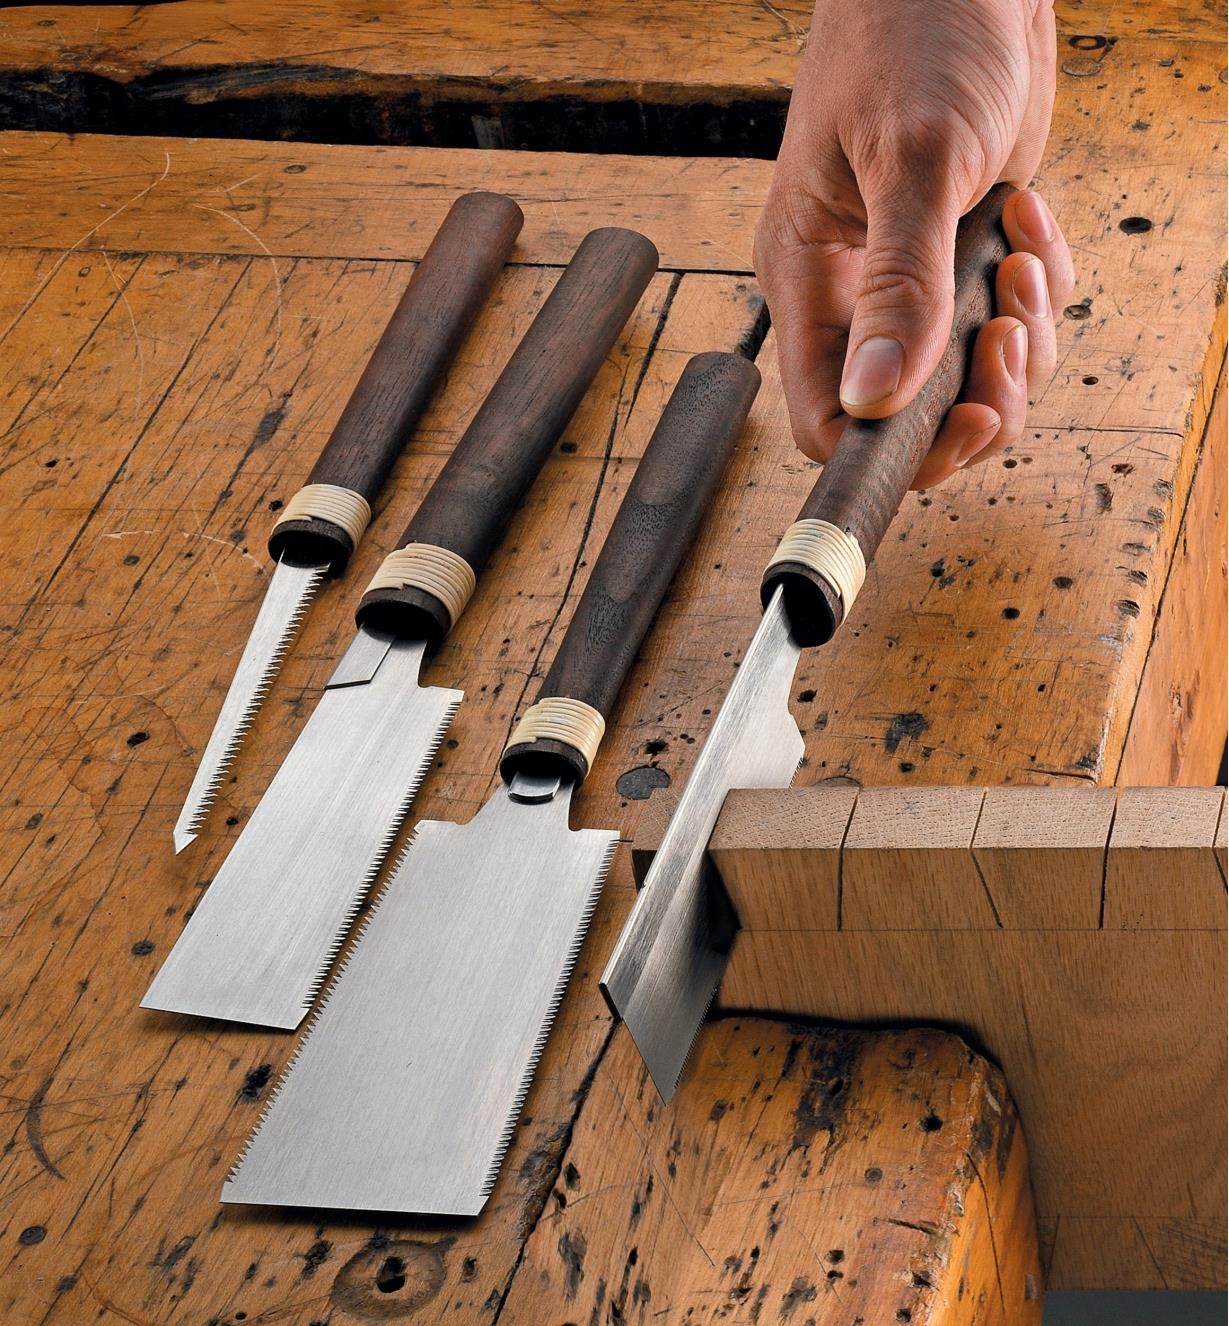 The Tools Worth Investing In To Start Woodworking At Home